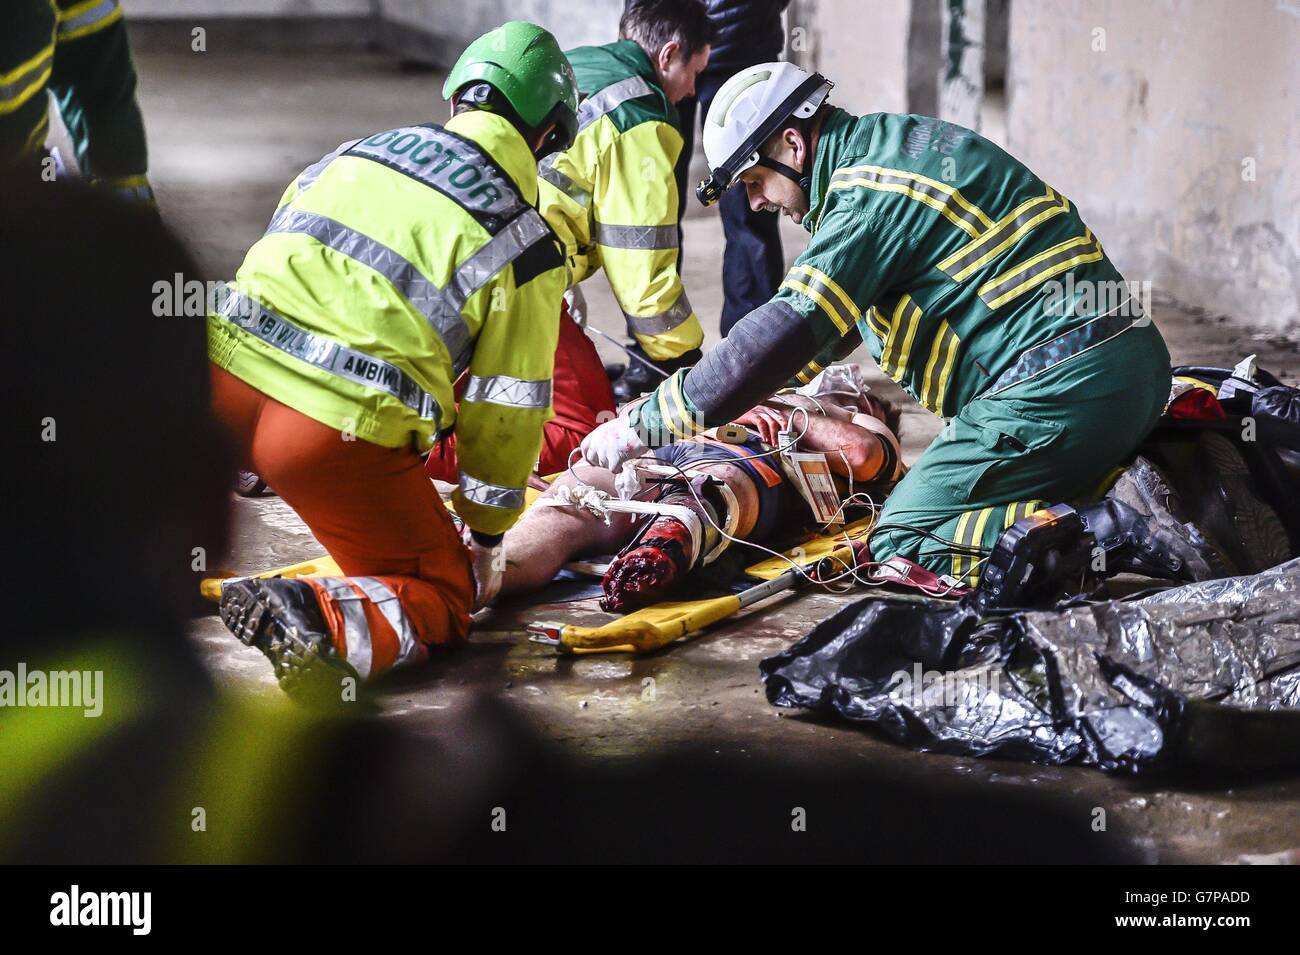 A medical Critical Care Team work on a casualty, posed by an actor, during a live multi-agency training exercise near Newport in Wales. Stock Photo